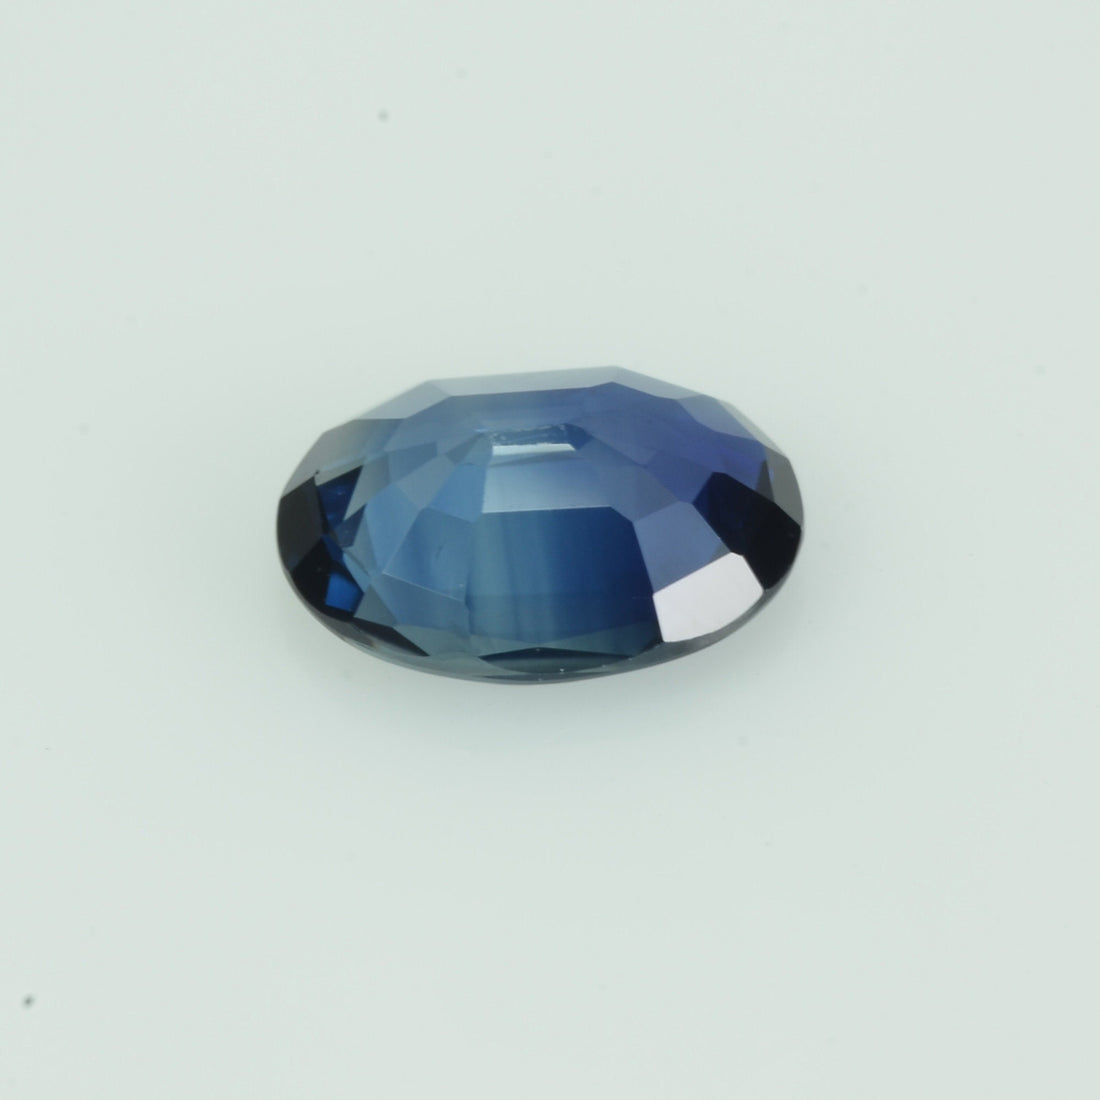 1.20 Cts Natural Blue Sapphire Loose Gemstone Oval Cut